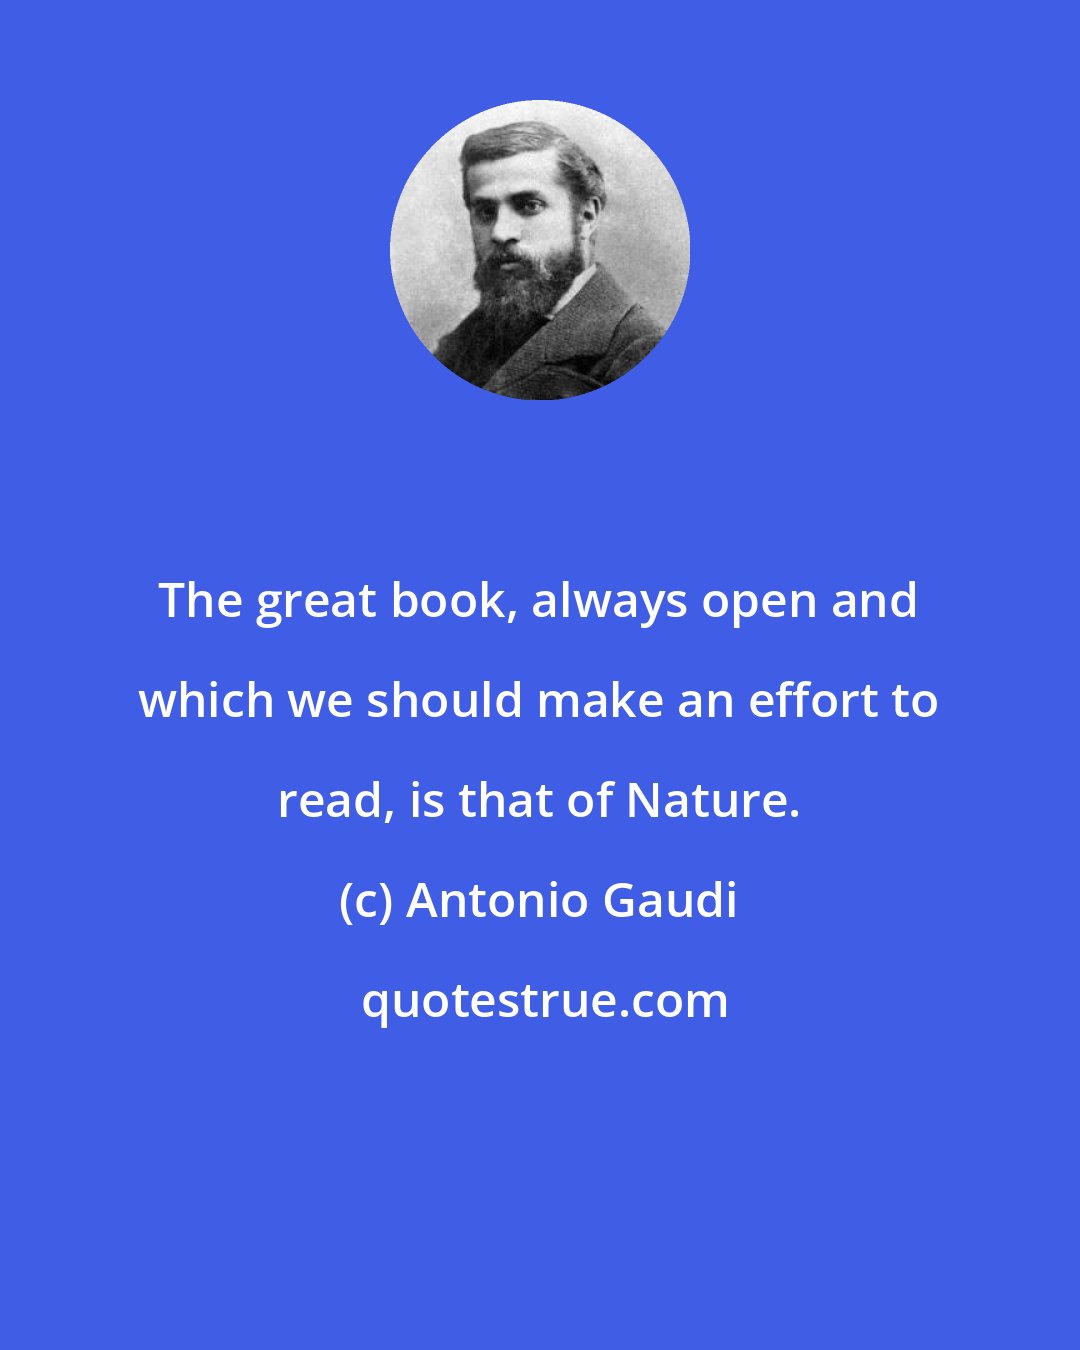 Antonio Gaudi: The great book, always open and which we should make an effort to read, is that of Nature.